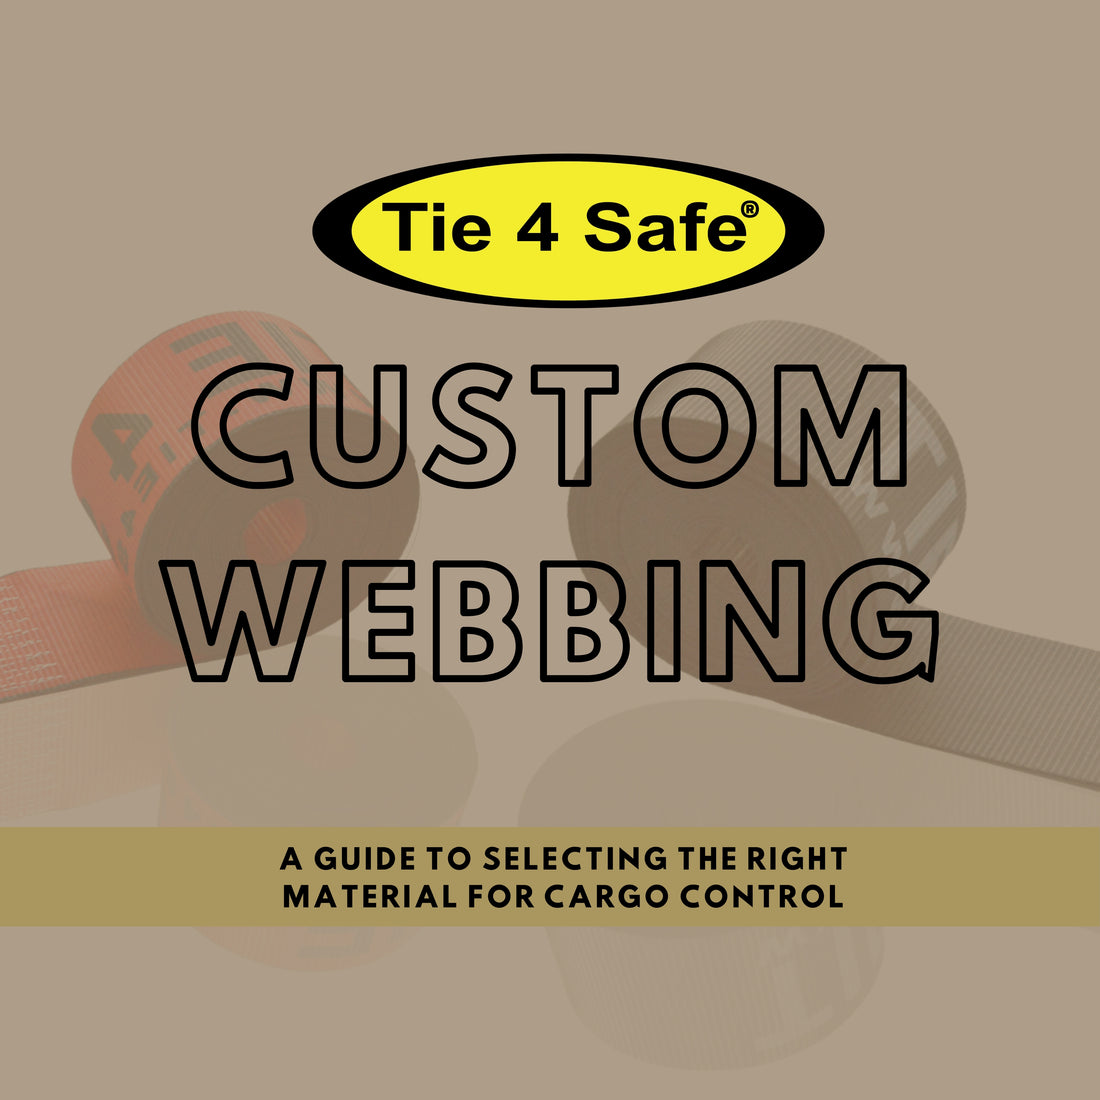 Custom Webbing: A Guide to Selecting the Right Material For Cargo Control